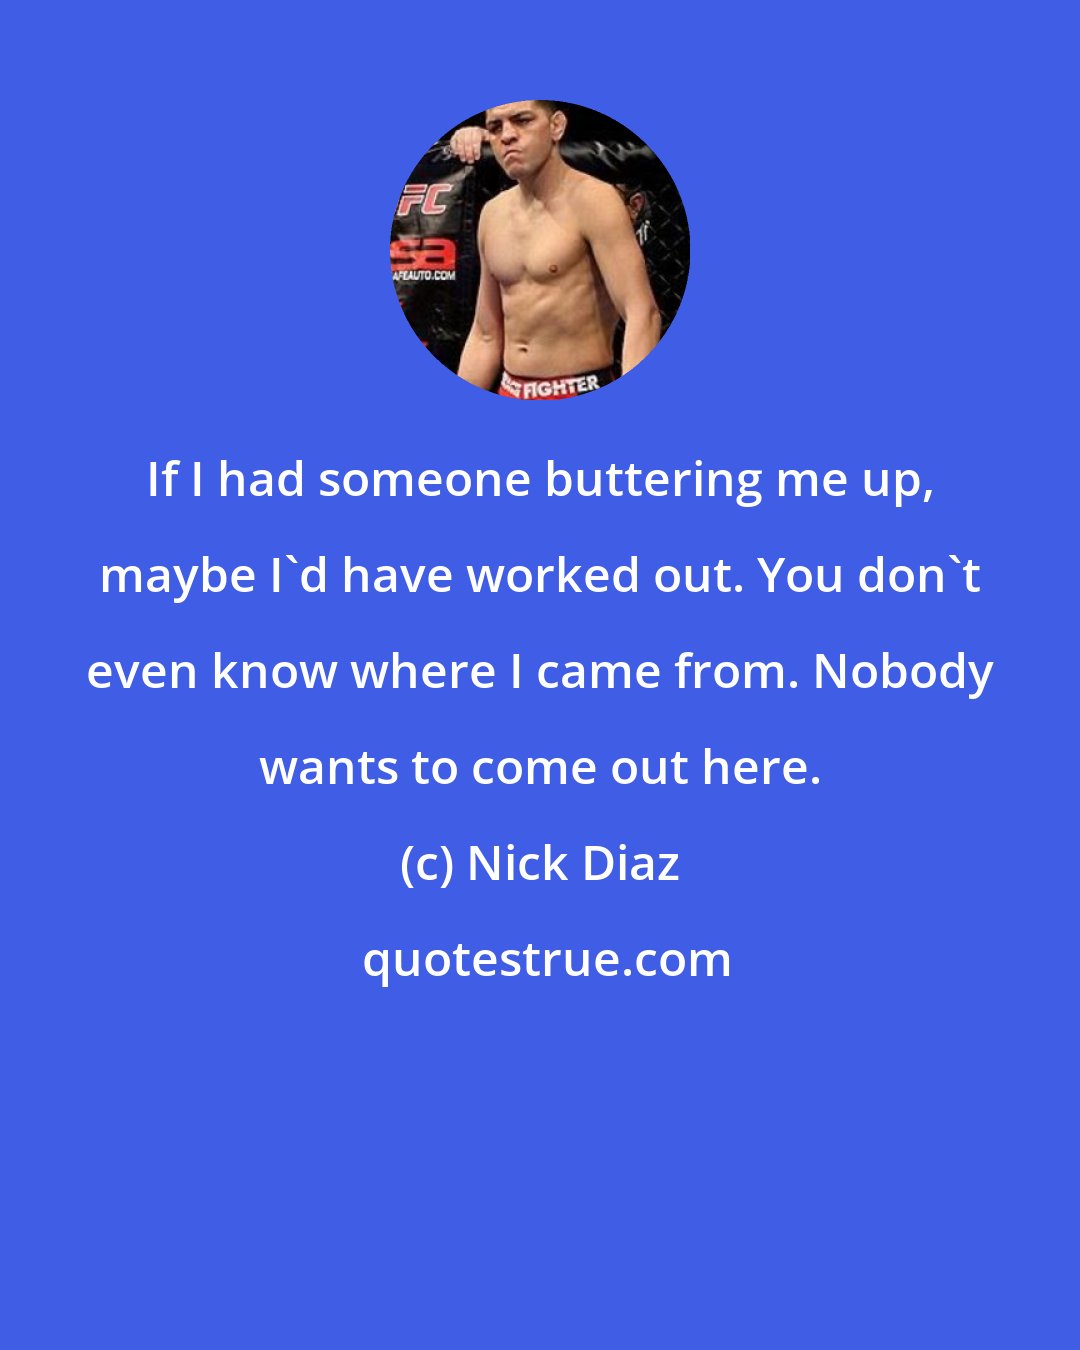 Nick Diaz: If I had someone buttering me up, maybe I'd have worked out. You don't even know where I came from. Nobody wants to come out here.